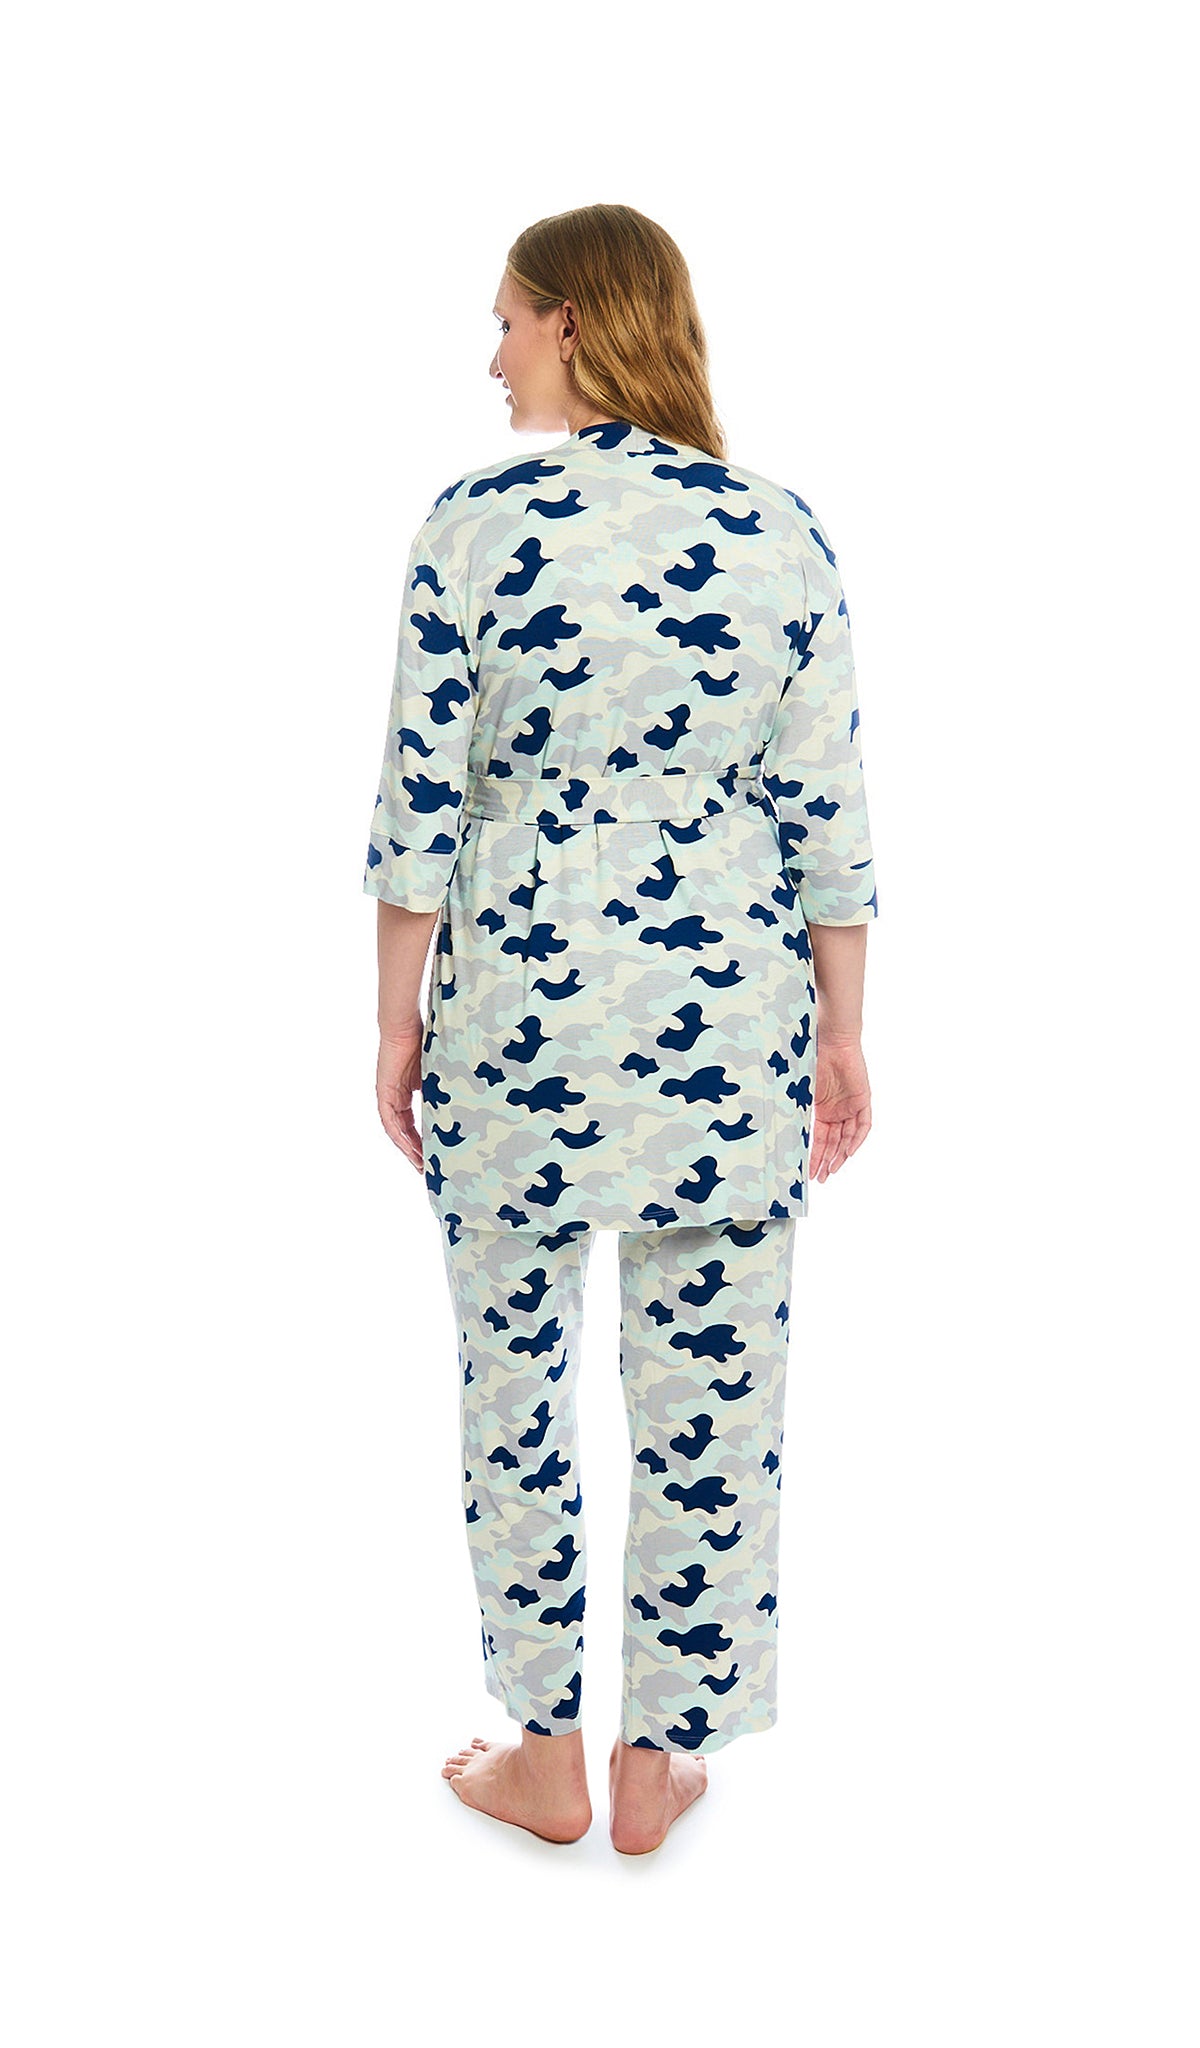 Camo Analise 5-Piece Set, back shot of woman wearing robe and pant.